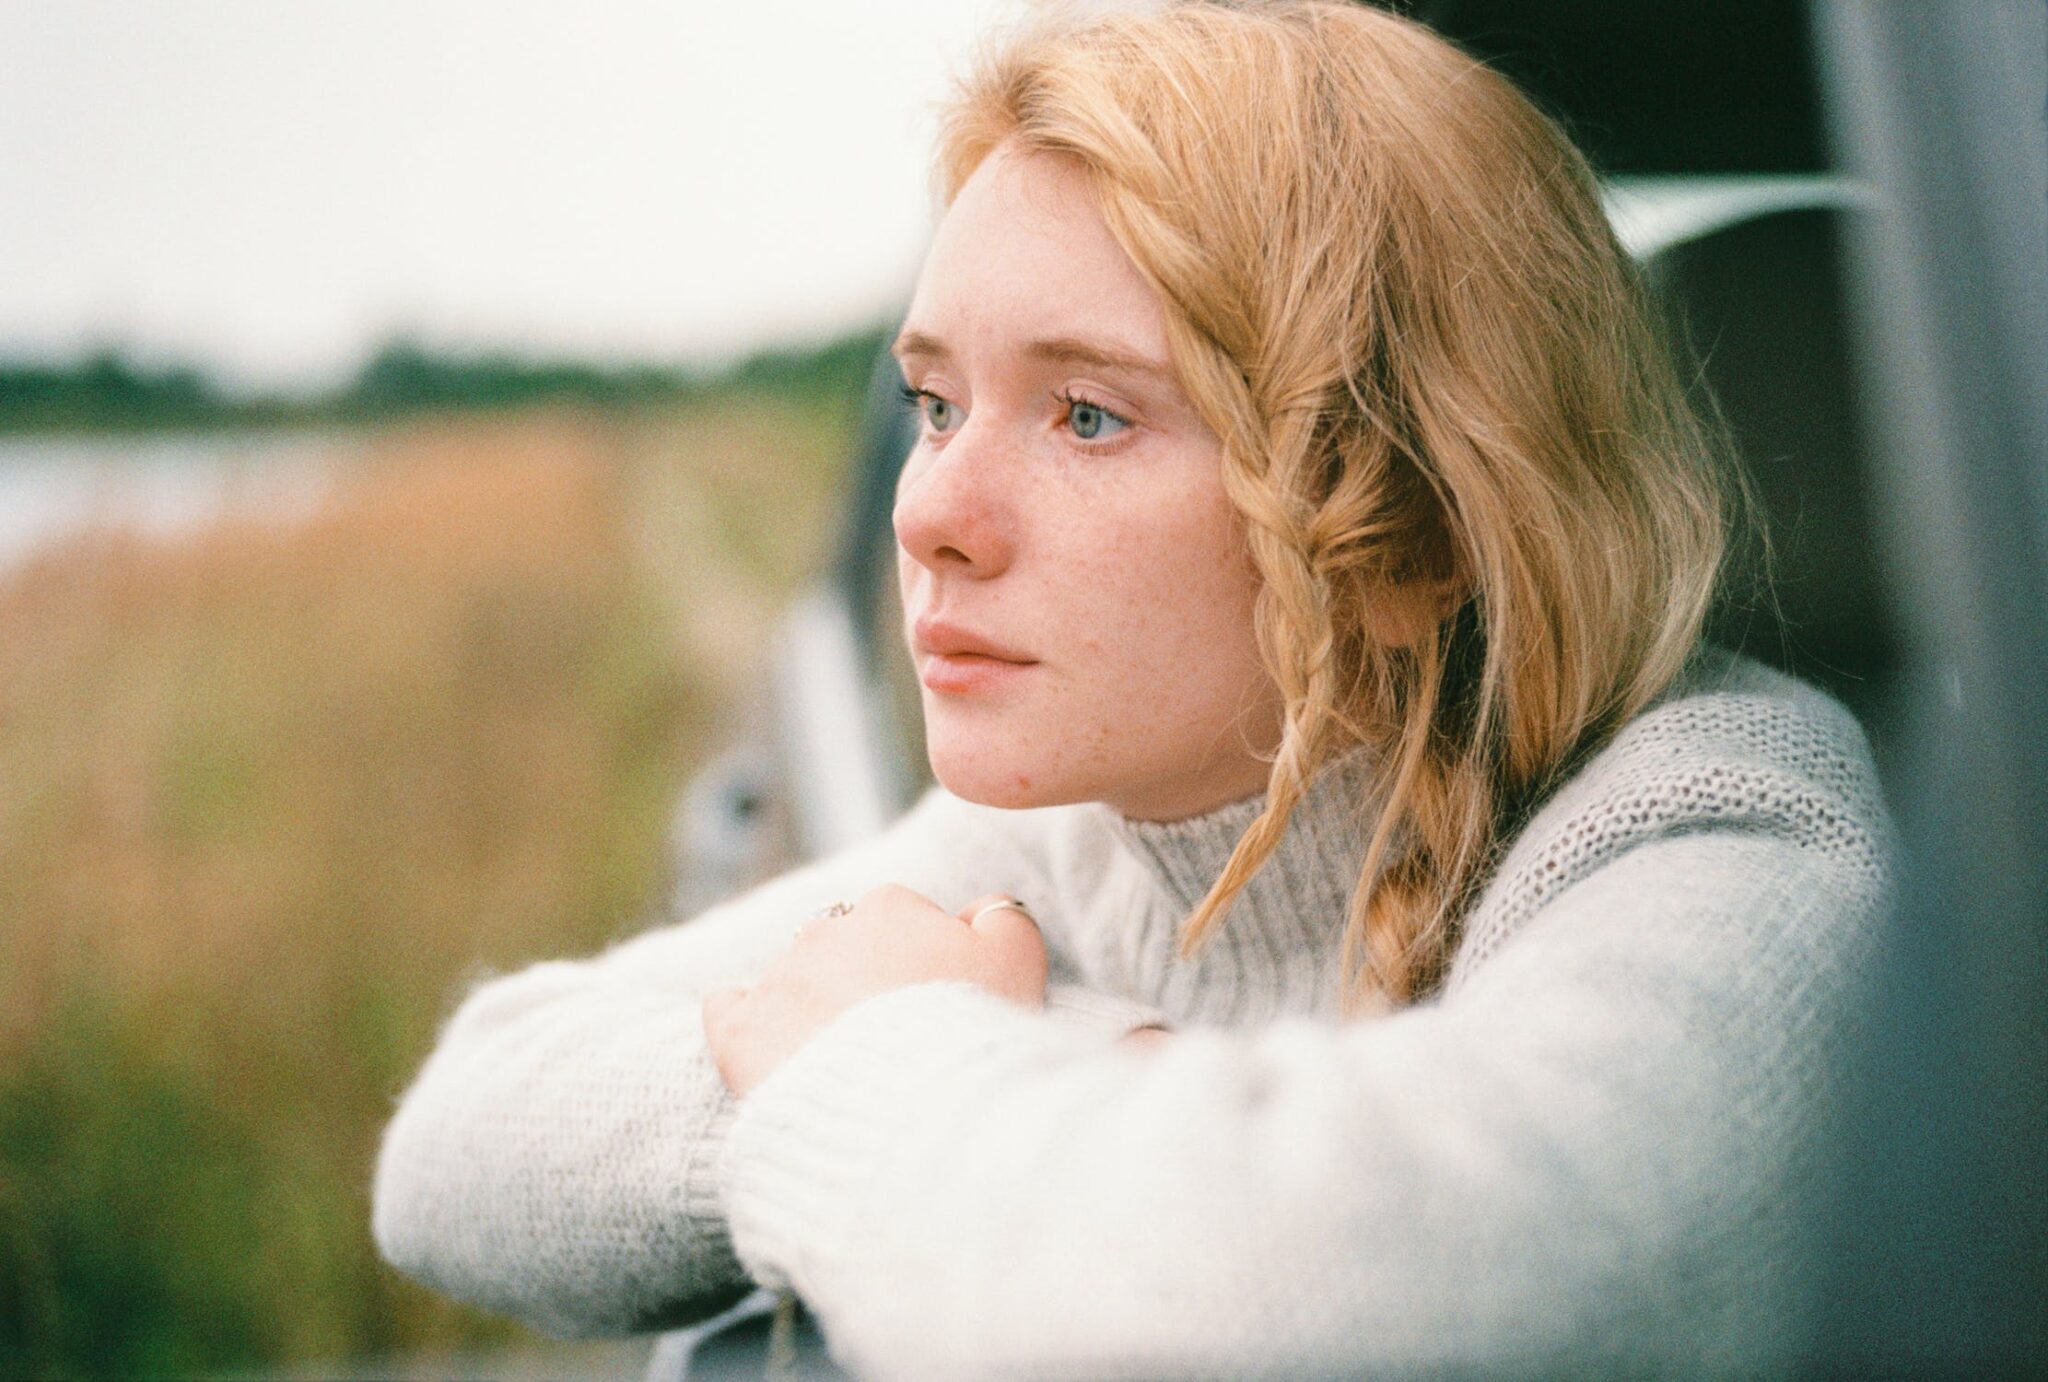 strawberry blonde lady wearing a white jumper looking outside a car window